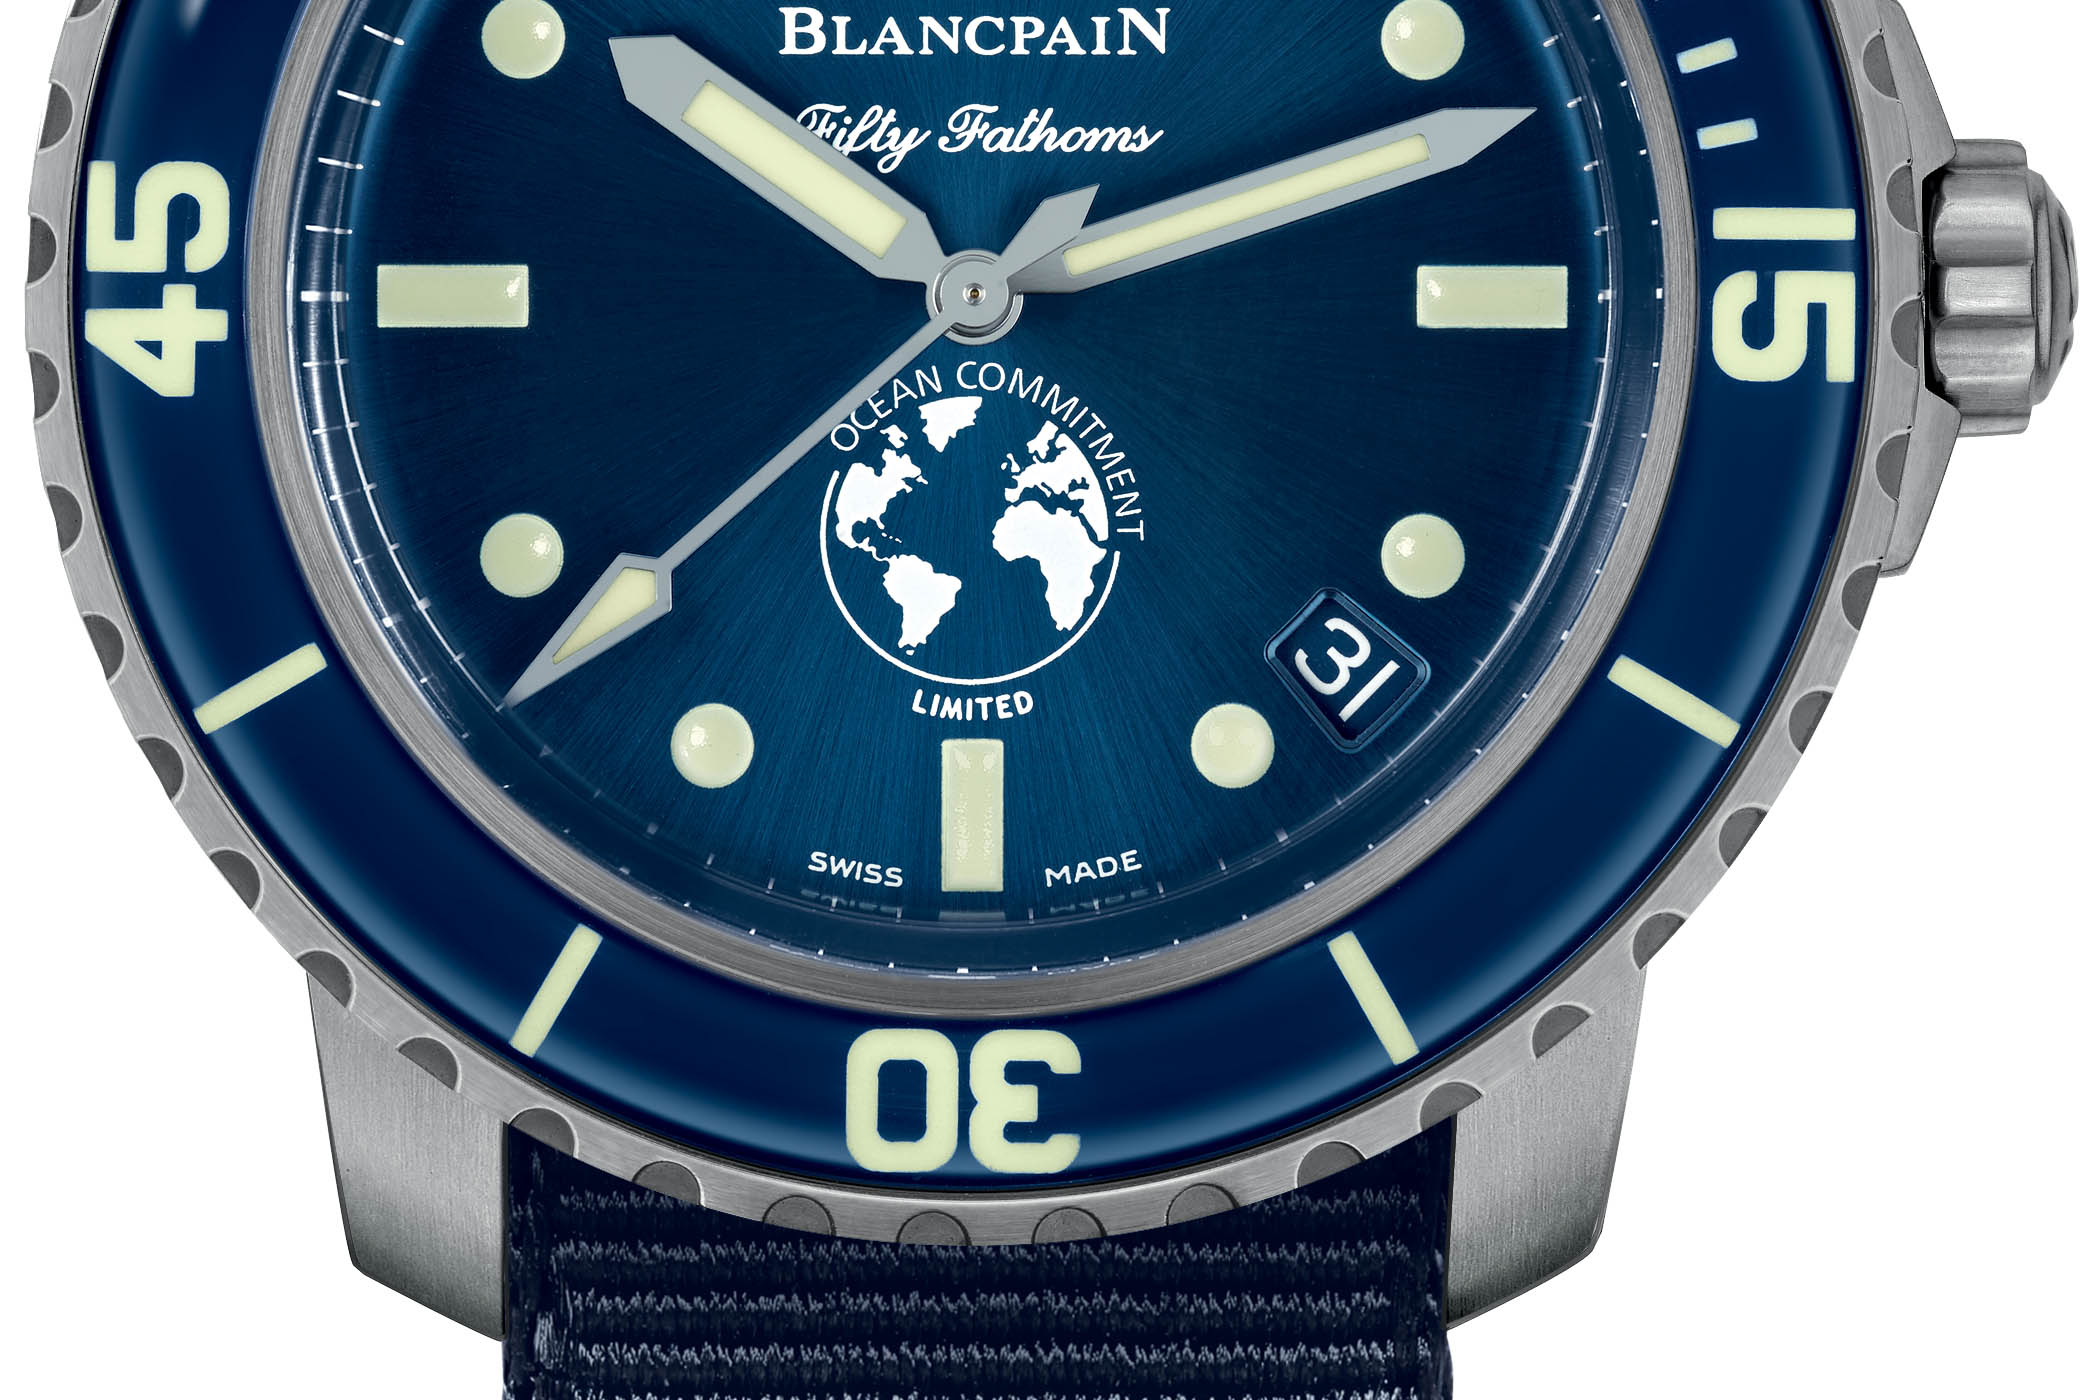 Blancpain Fifty Fathoms Ocean Commitment III Limited Edition - 1